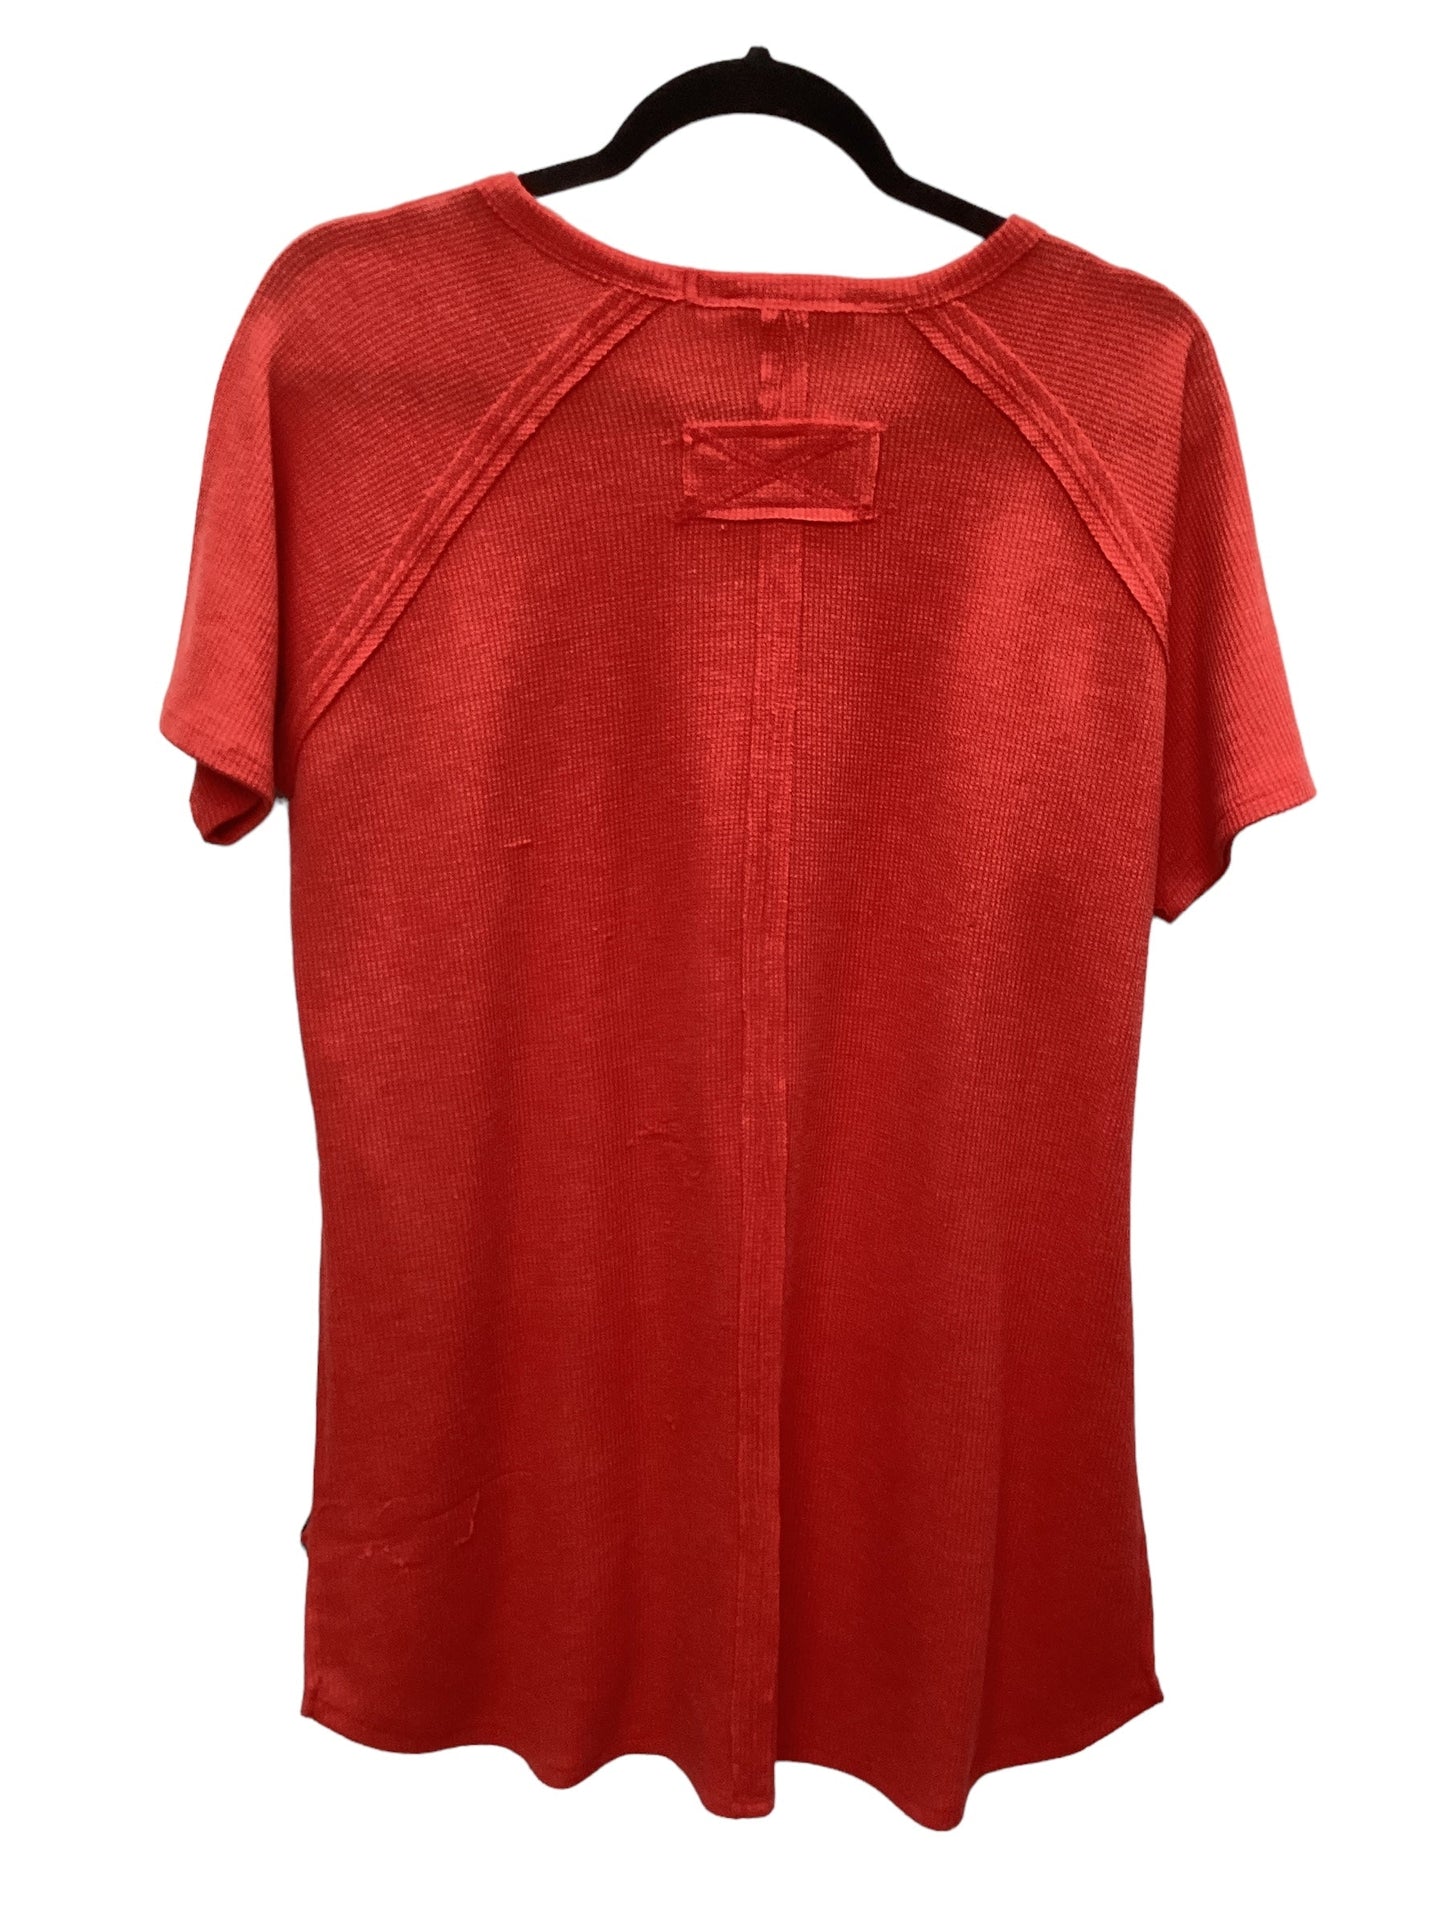 Red Top Short Sleeve Basic Zenana Outfitters, Size M